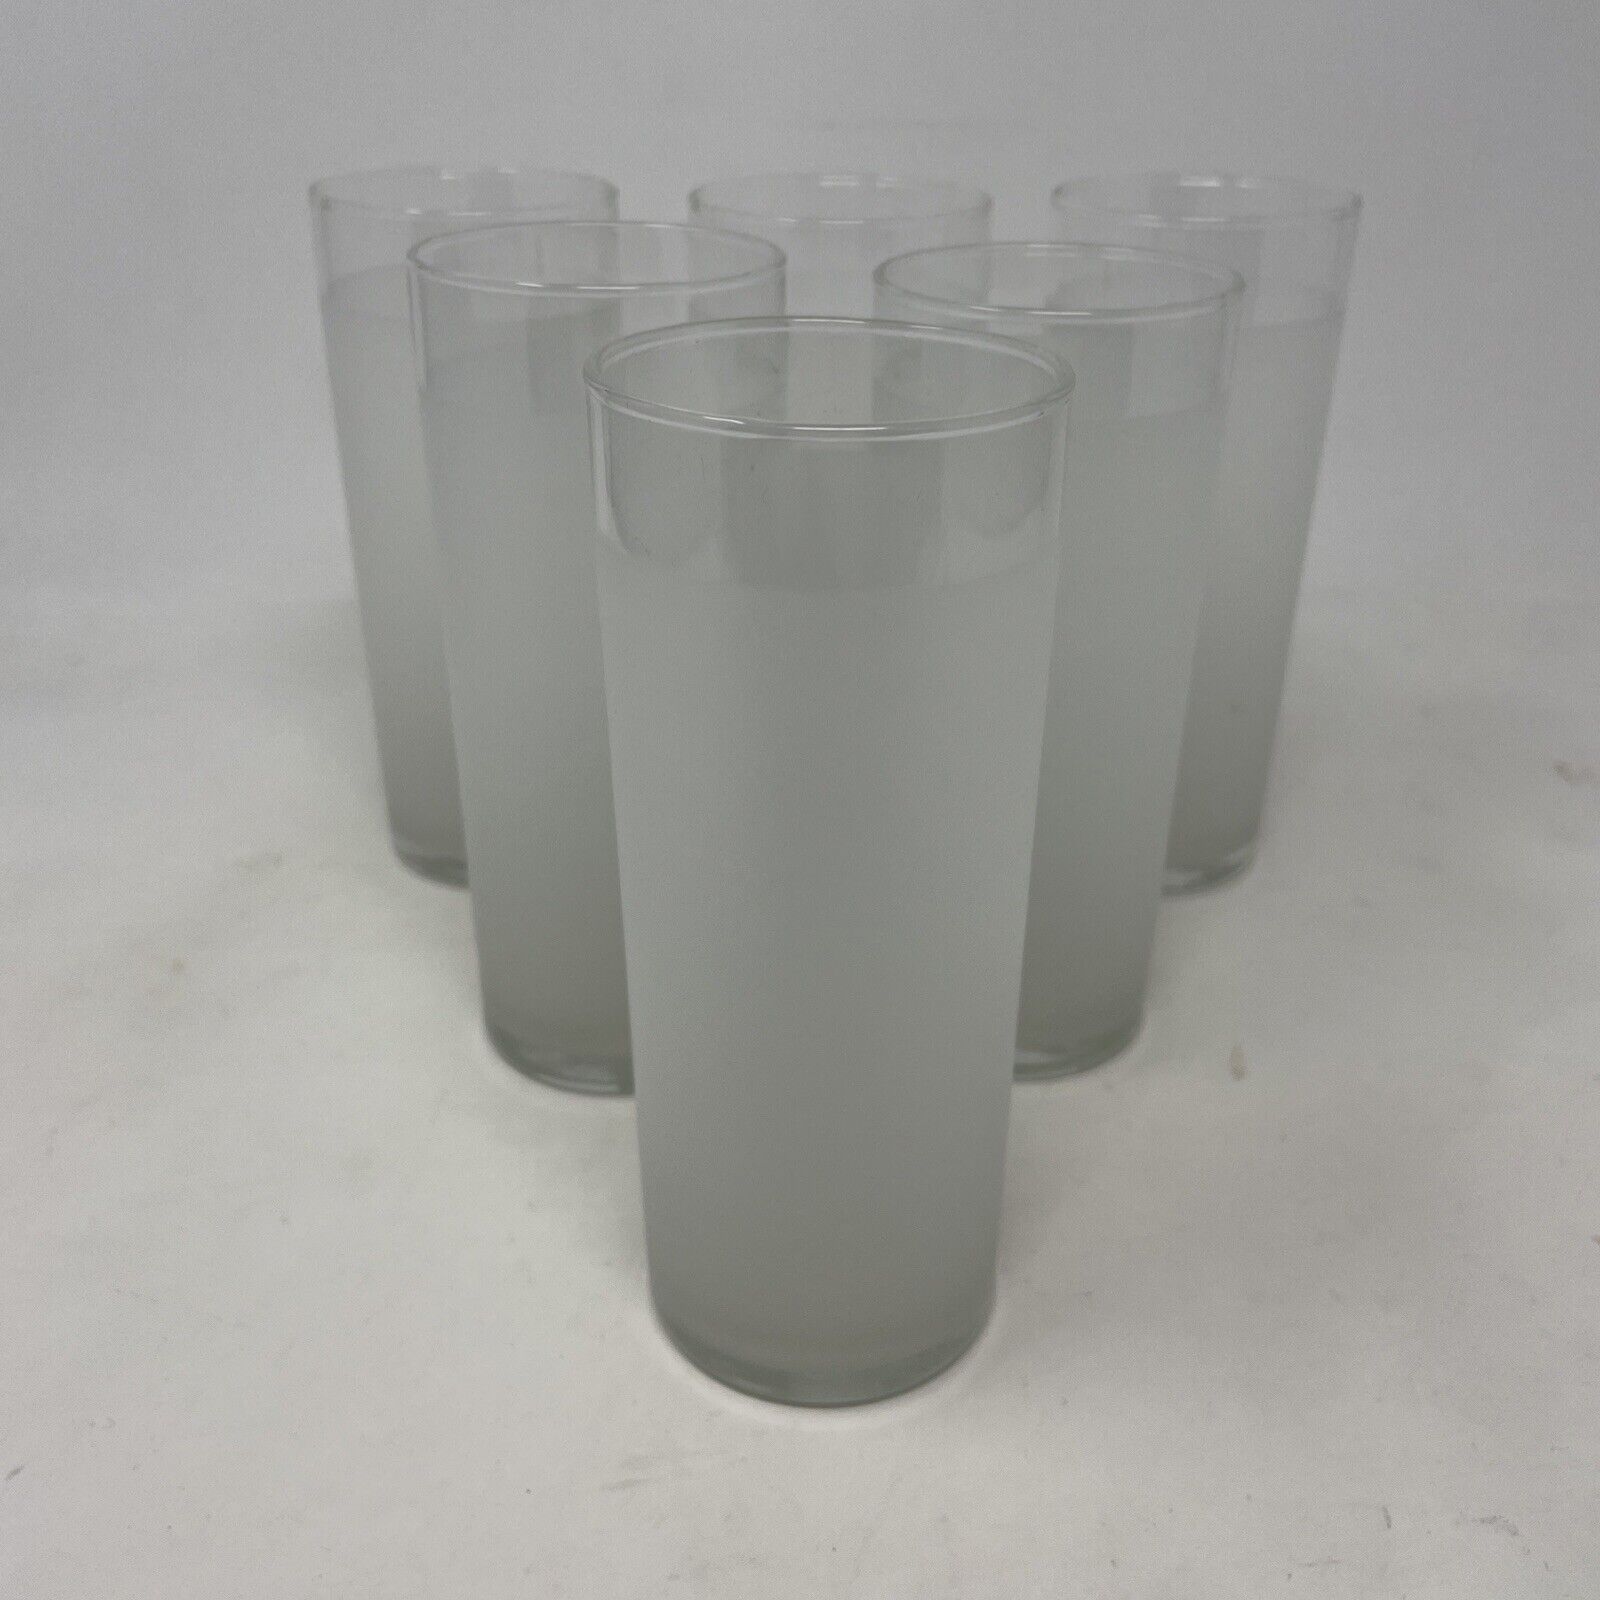 Vintage Mid Century Modern Libbey Frosted Drinking Glasses Set of Six (6)